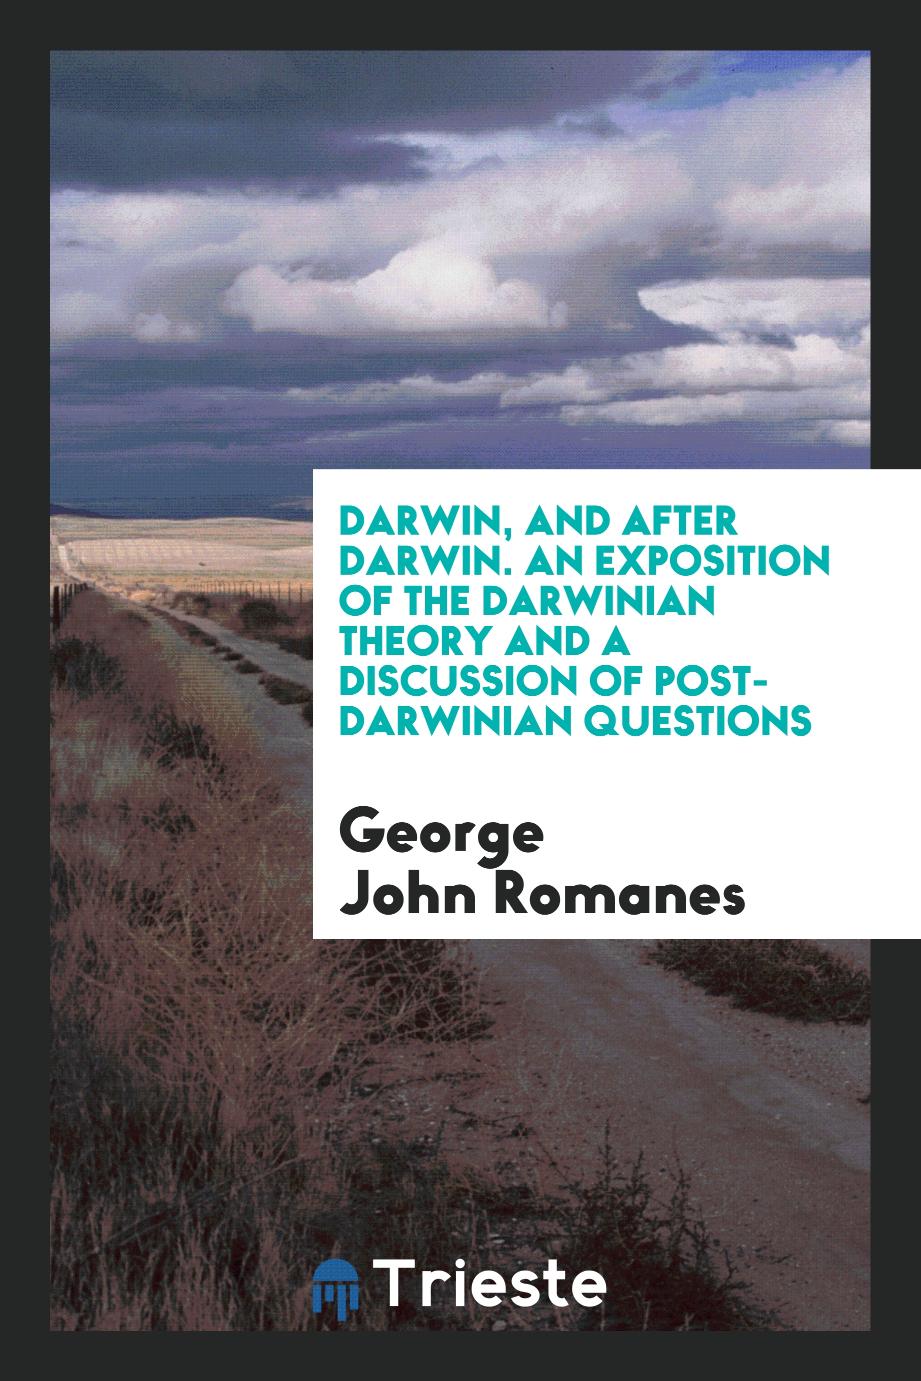 Darwin, and After Darwin. An Exposition of the Darwinian Theory and a Discussion of Post-Darwinian Questions